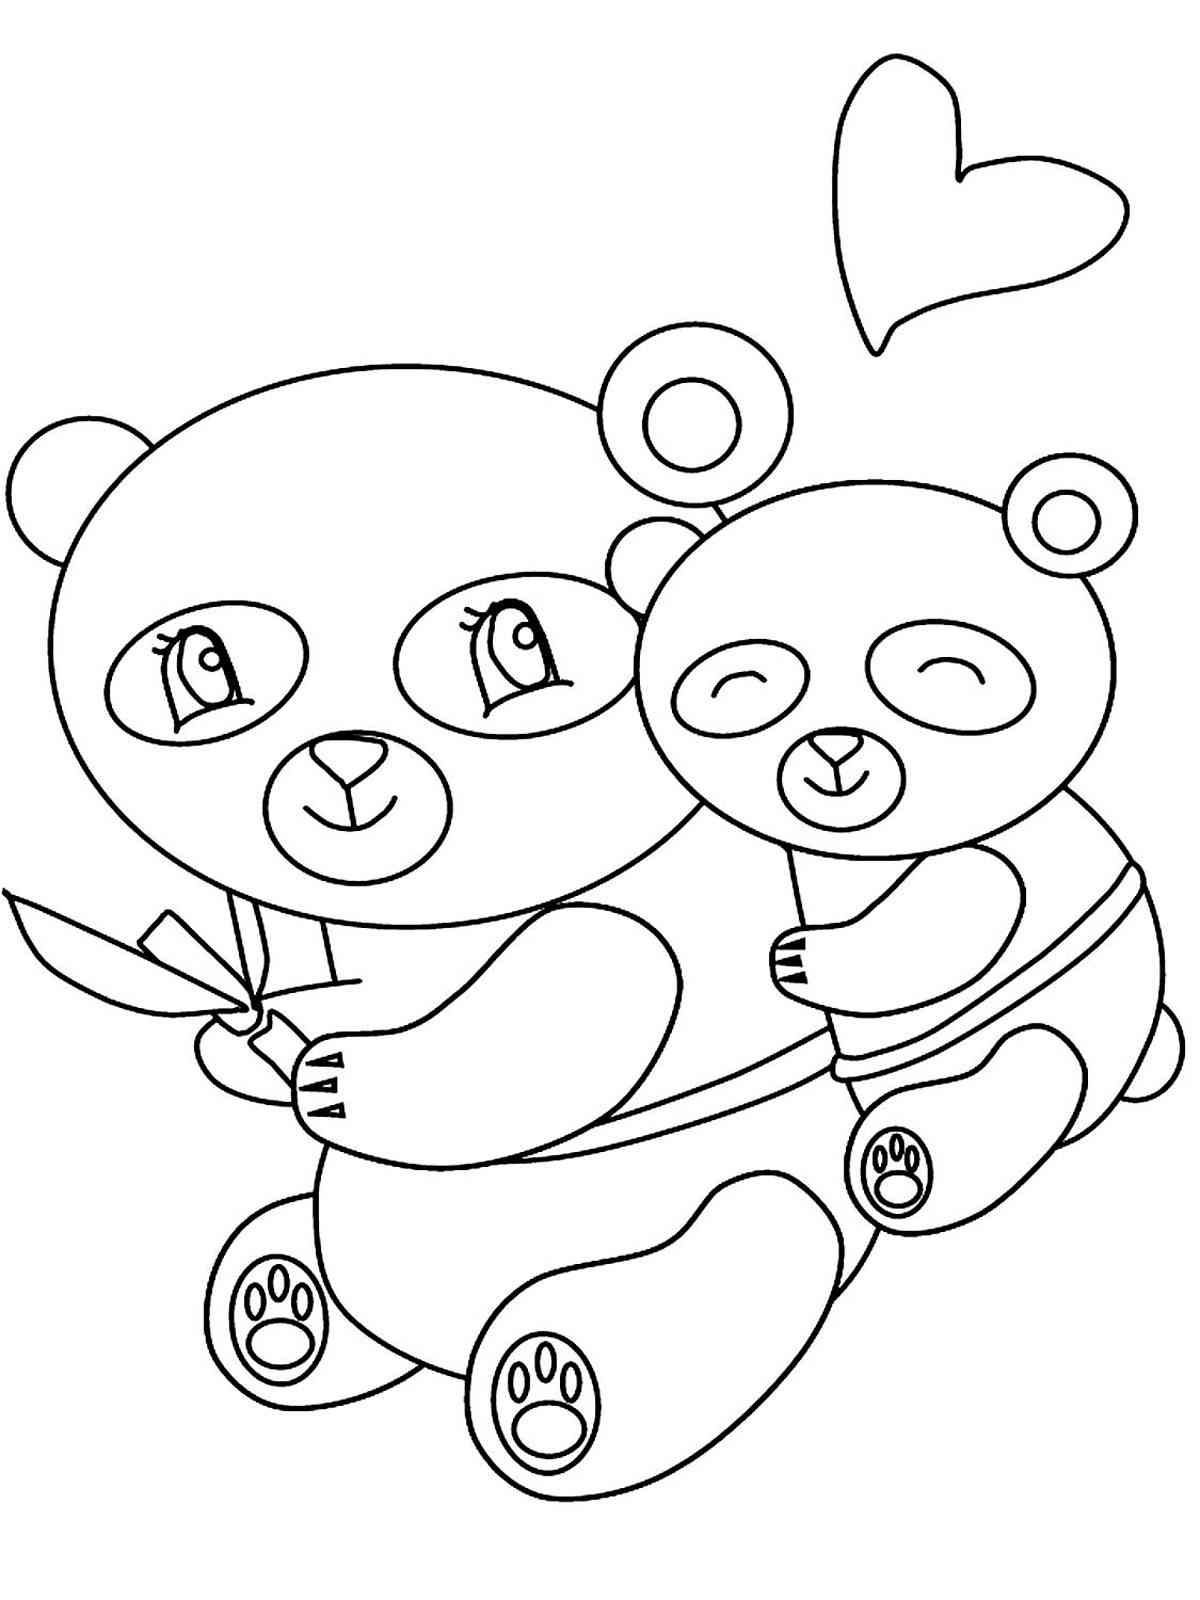 Panda with a cub on his back coloring page